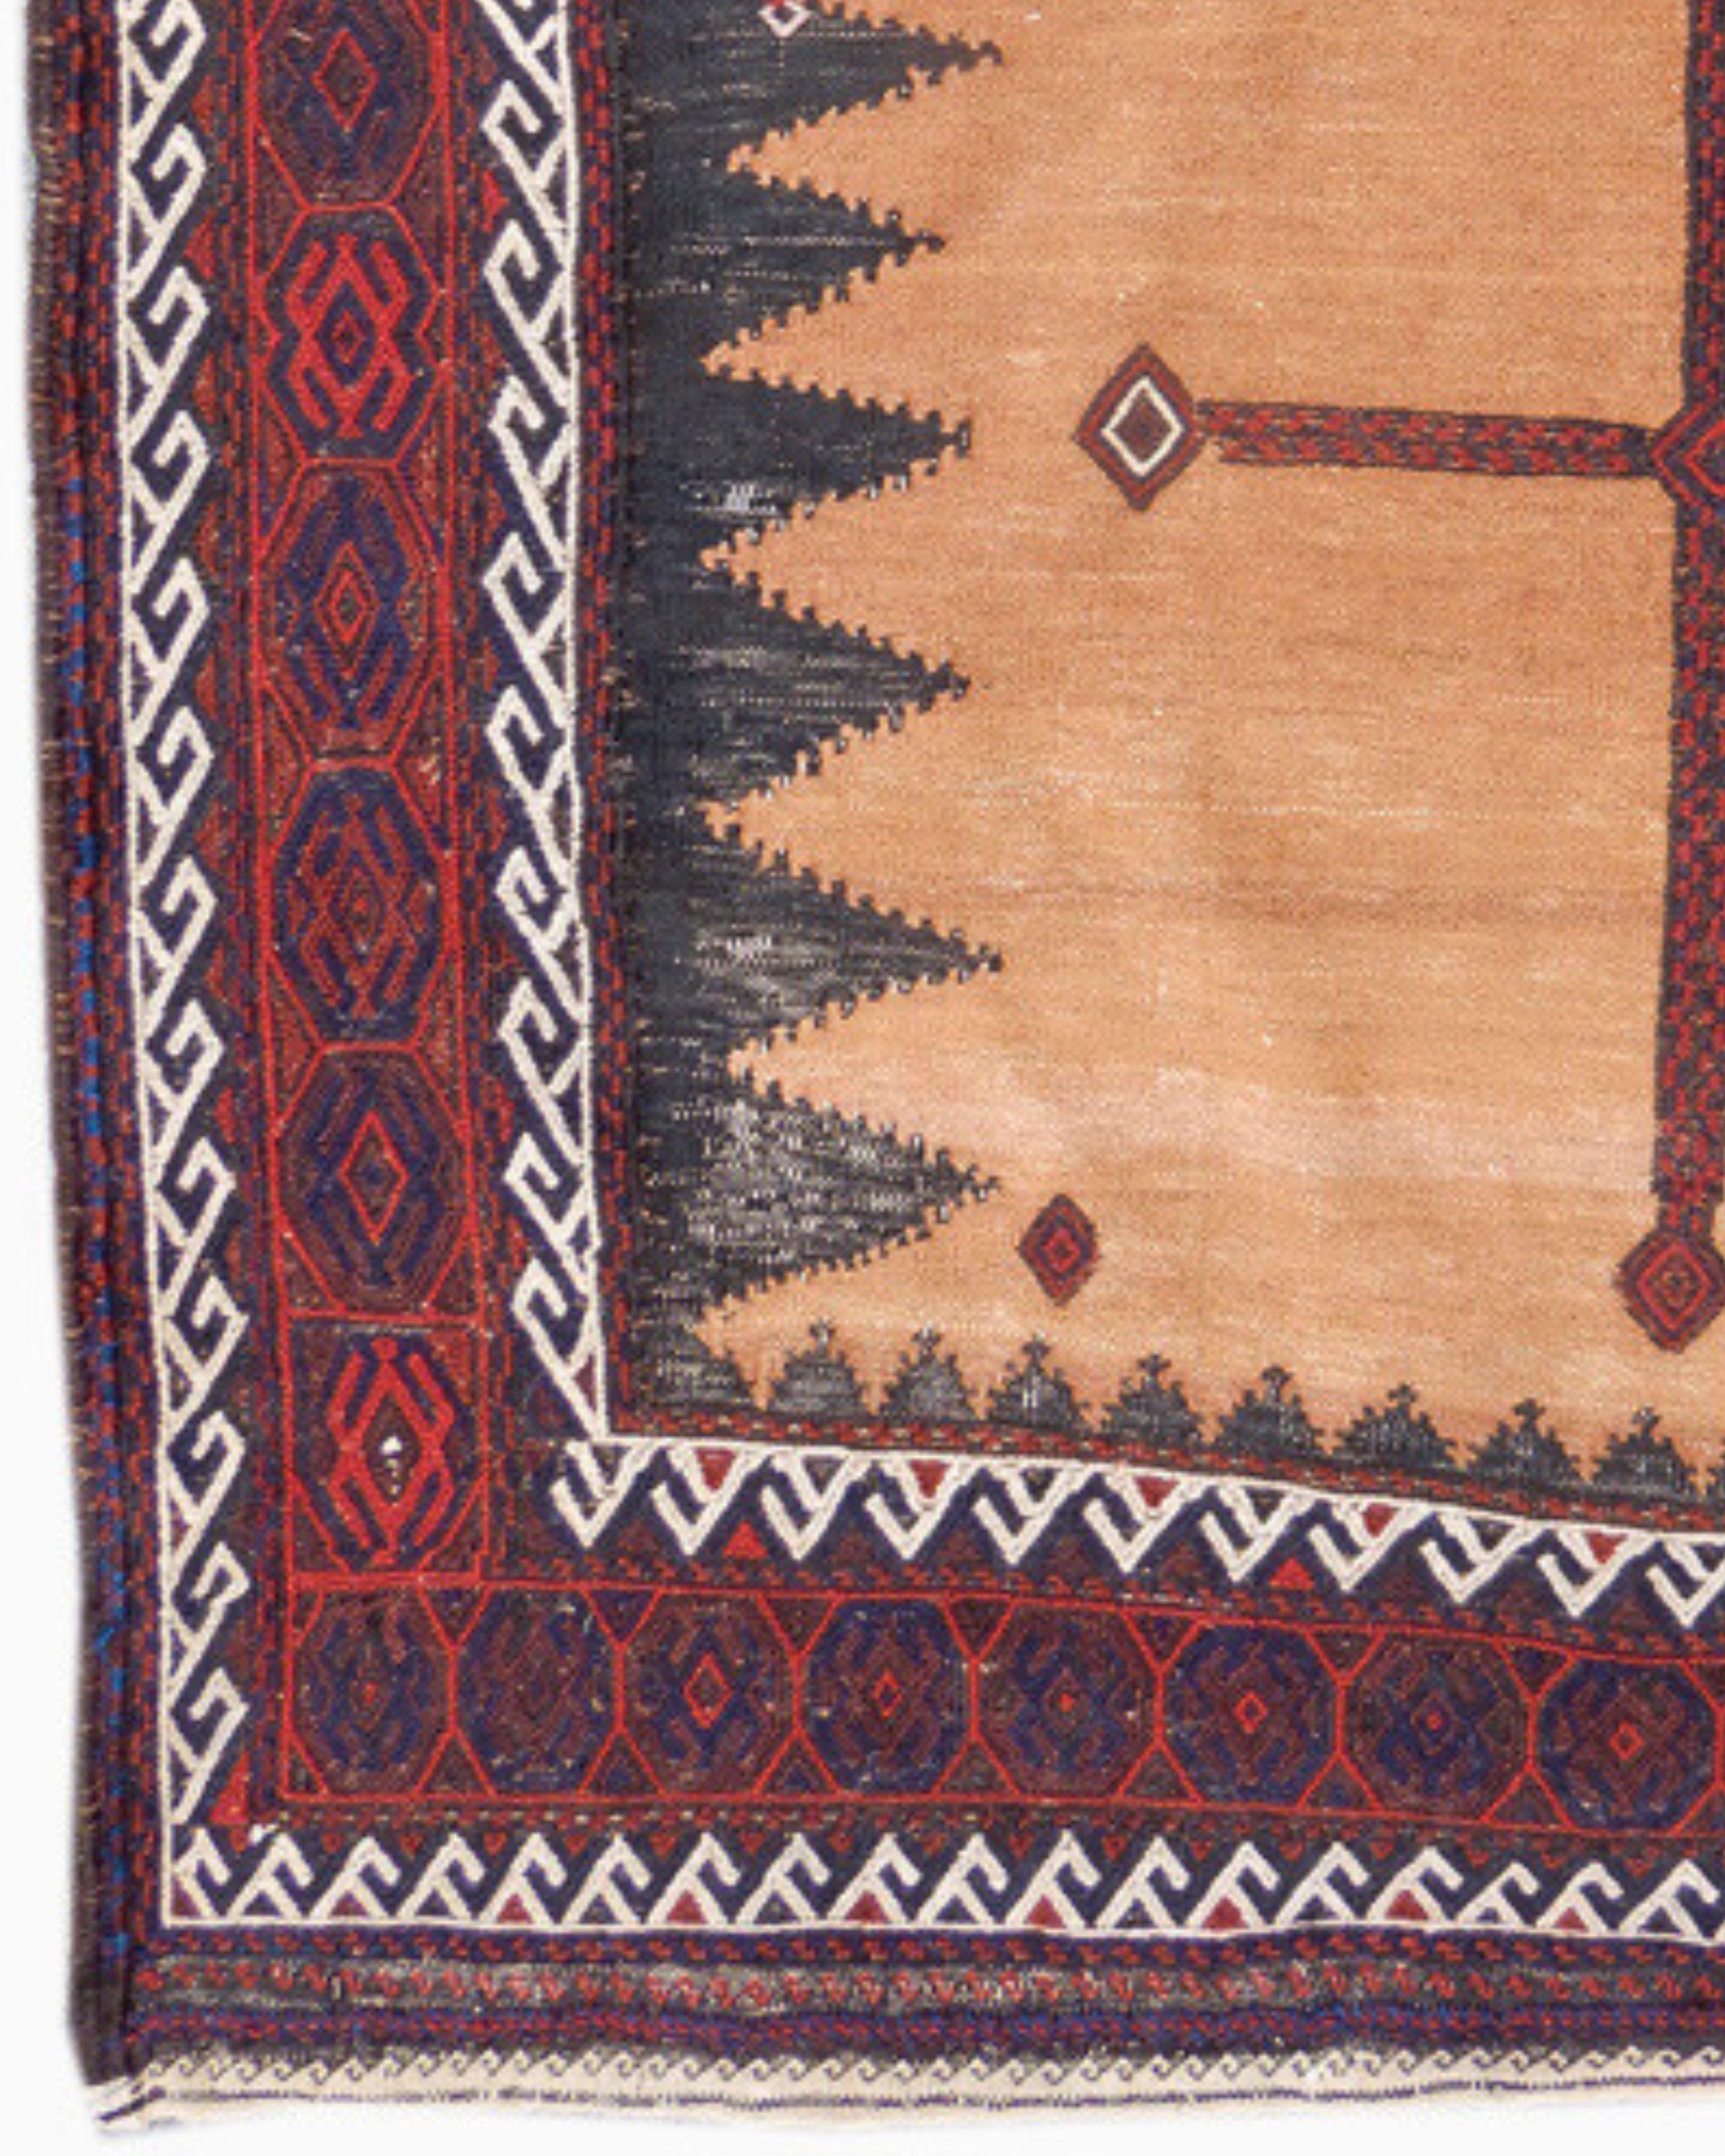 Hand-Woven Classic Camel Ground Baluch Soffreh Rug, c. 1900 For Sale